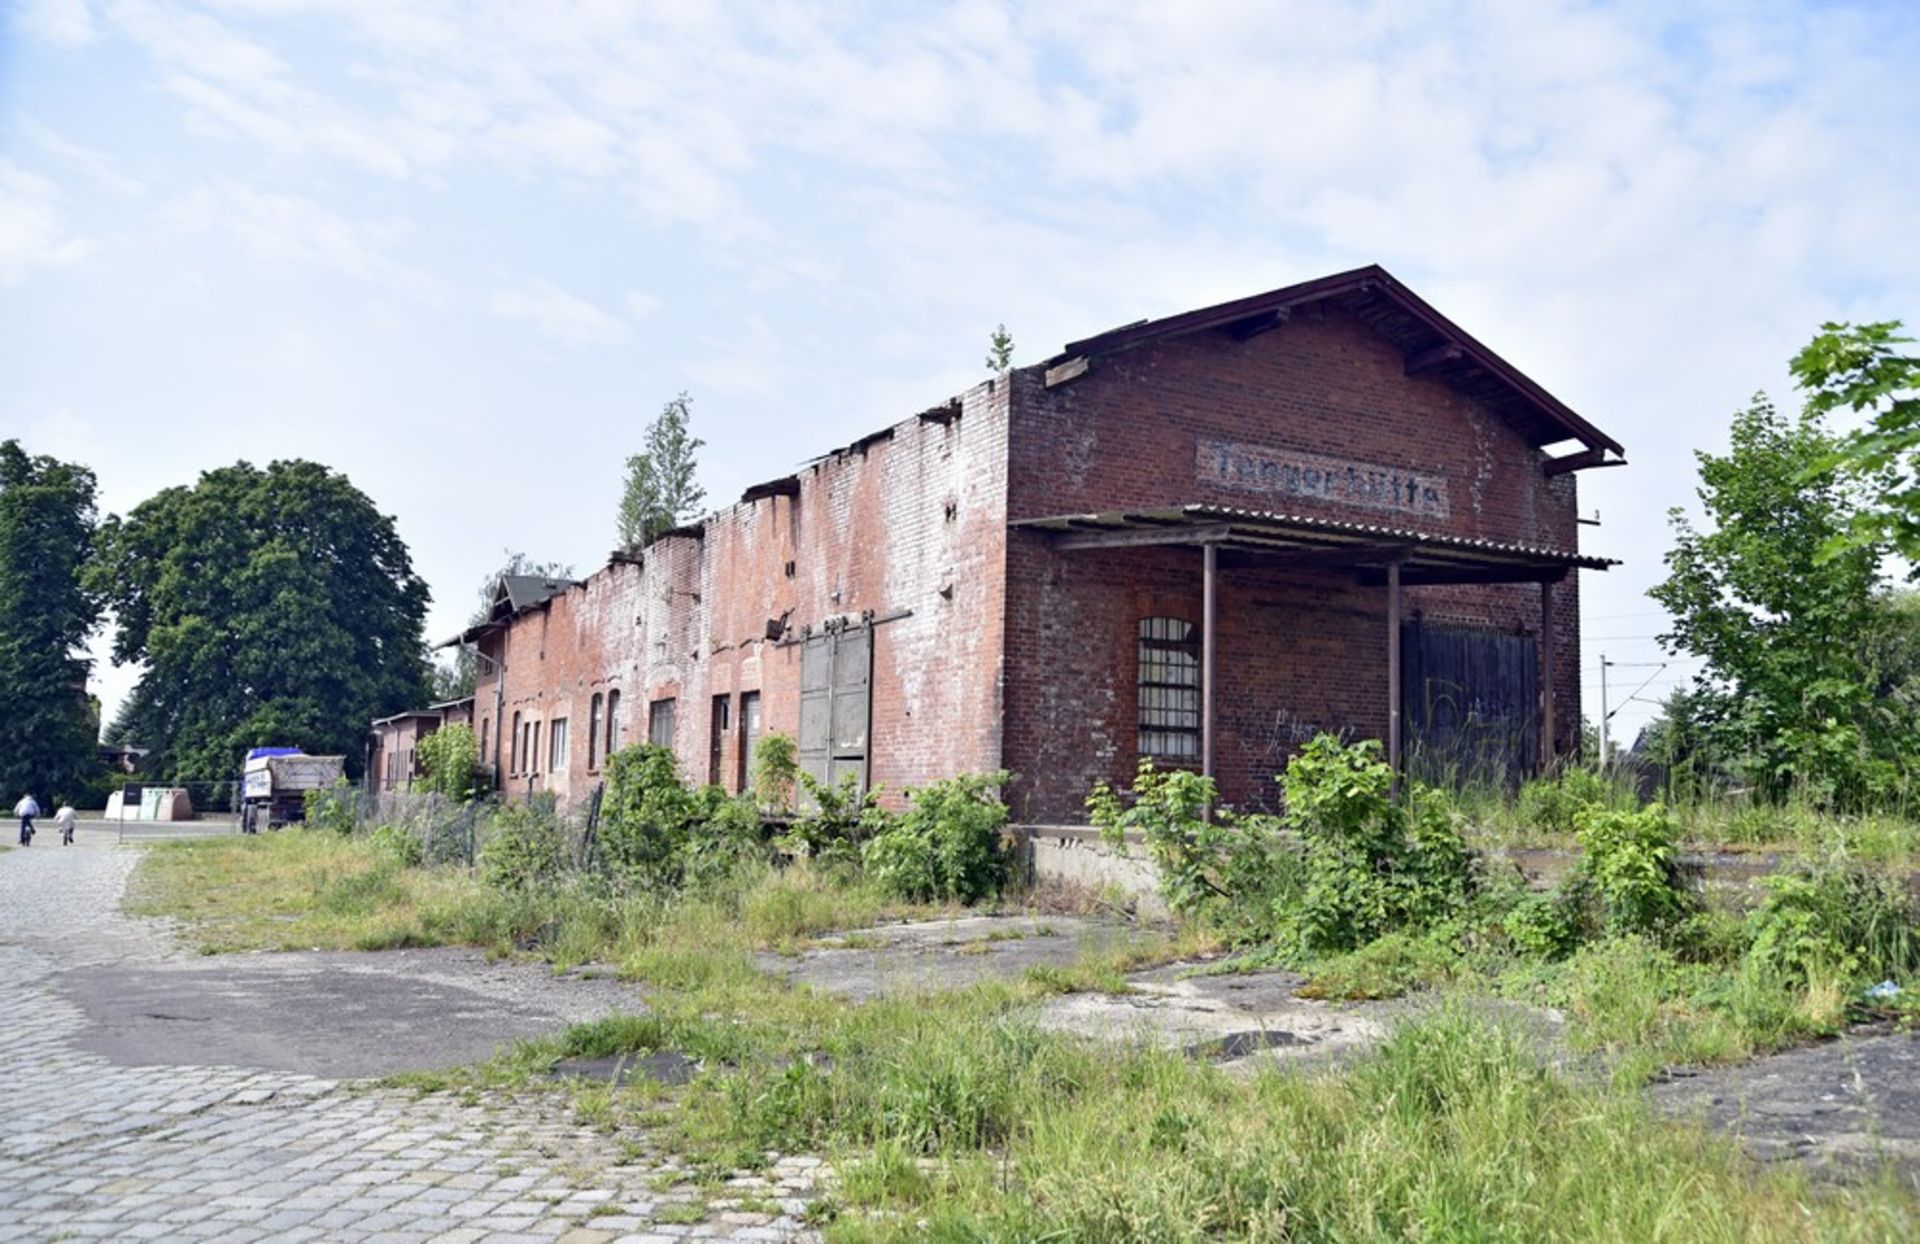 STATION HOUSE, GOODS SHED, OVER ONE ACRE Tangerhütte, Saxony, Germany, - Image 12 of 98